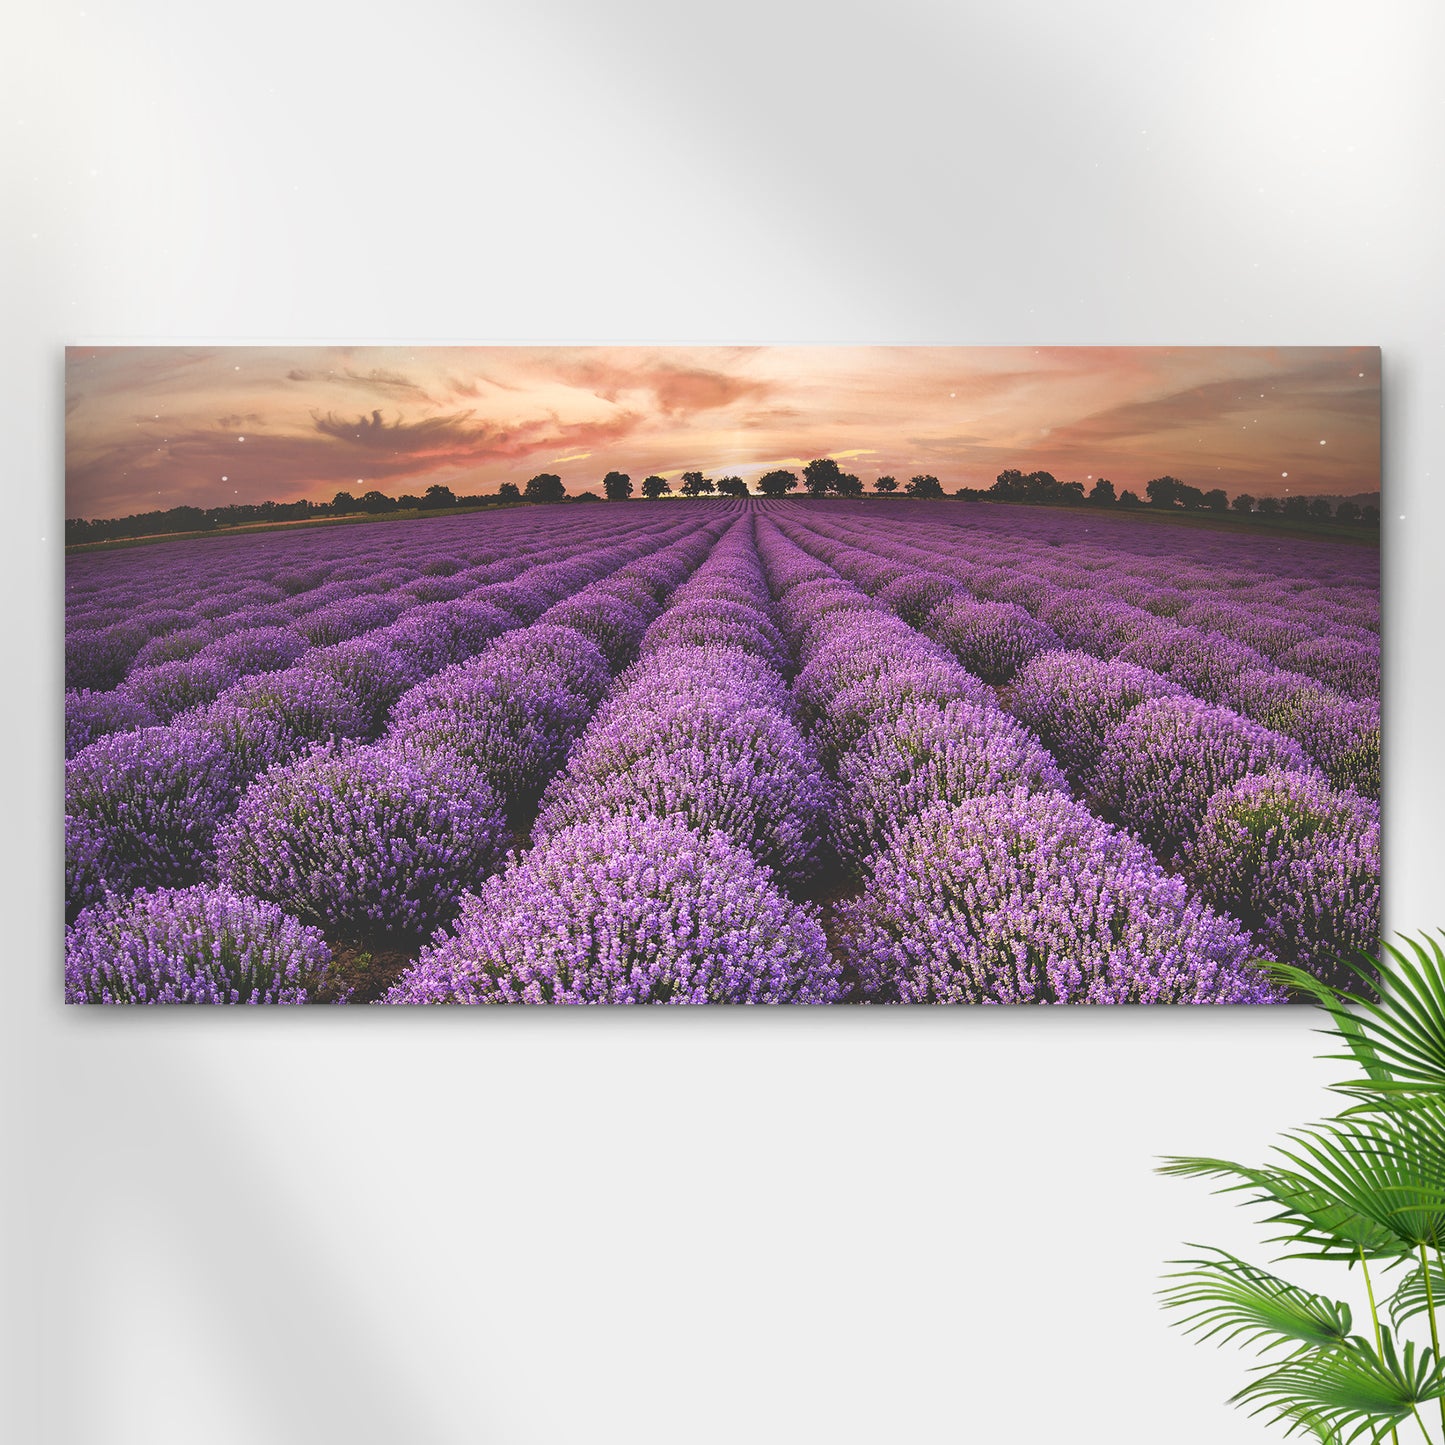 Lavender Field By The Sunset Canvas Wall Art - Image by Tailored Canvases